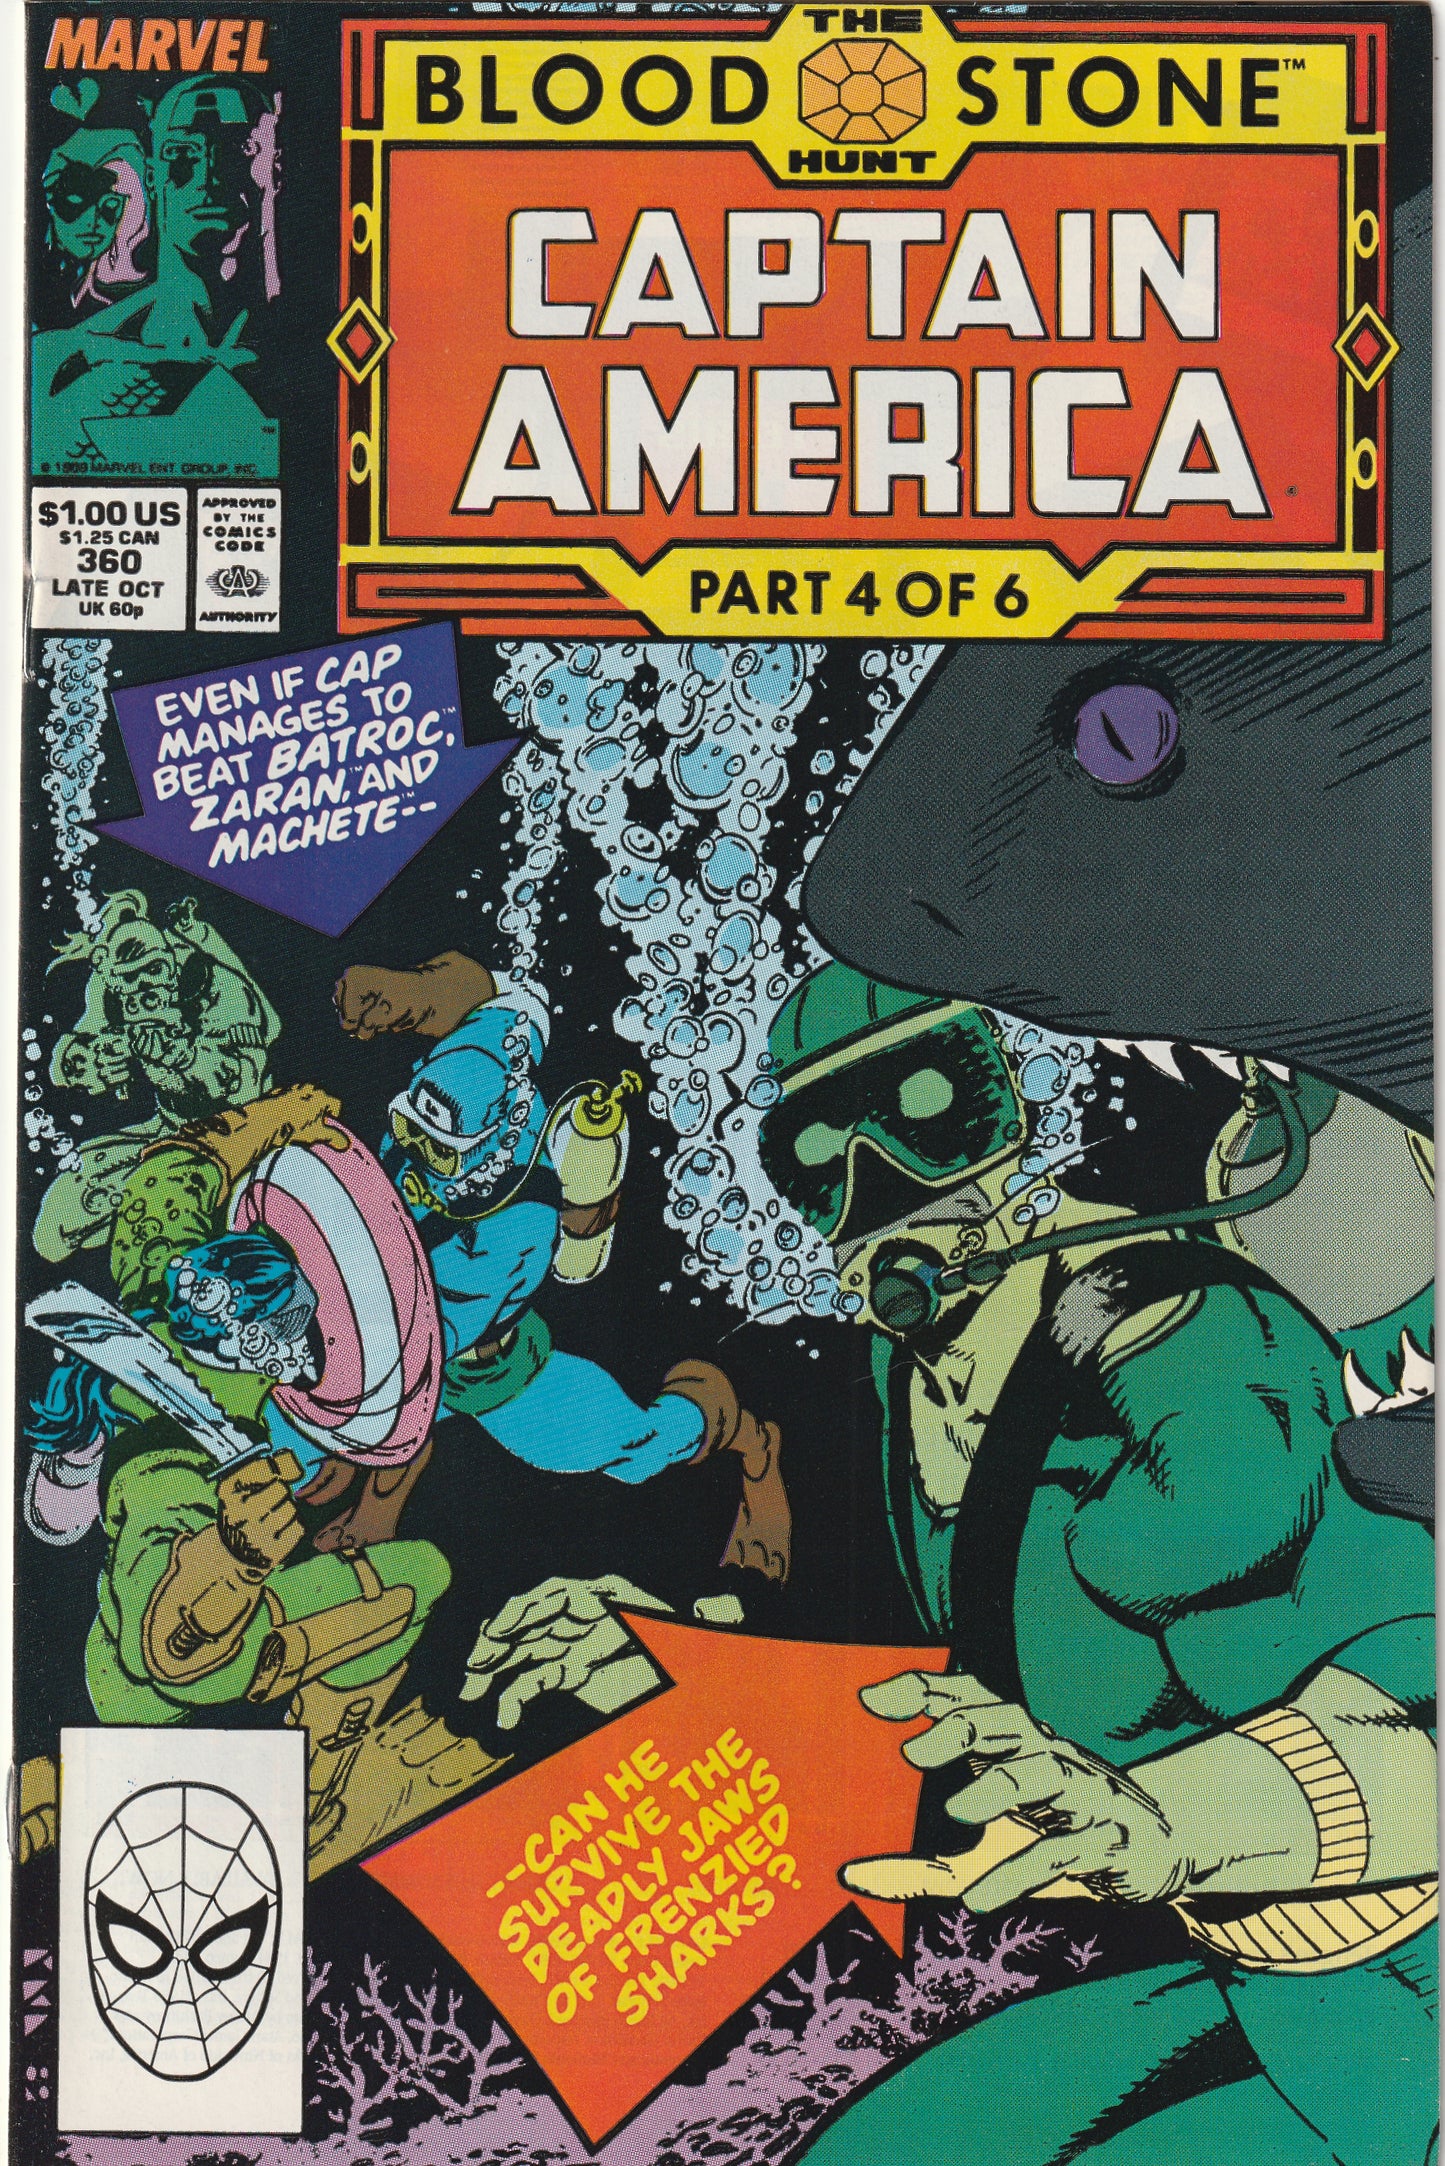 Captain America #360 (1989) - 2nd Cameo Appearance of Crossbones